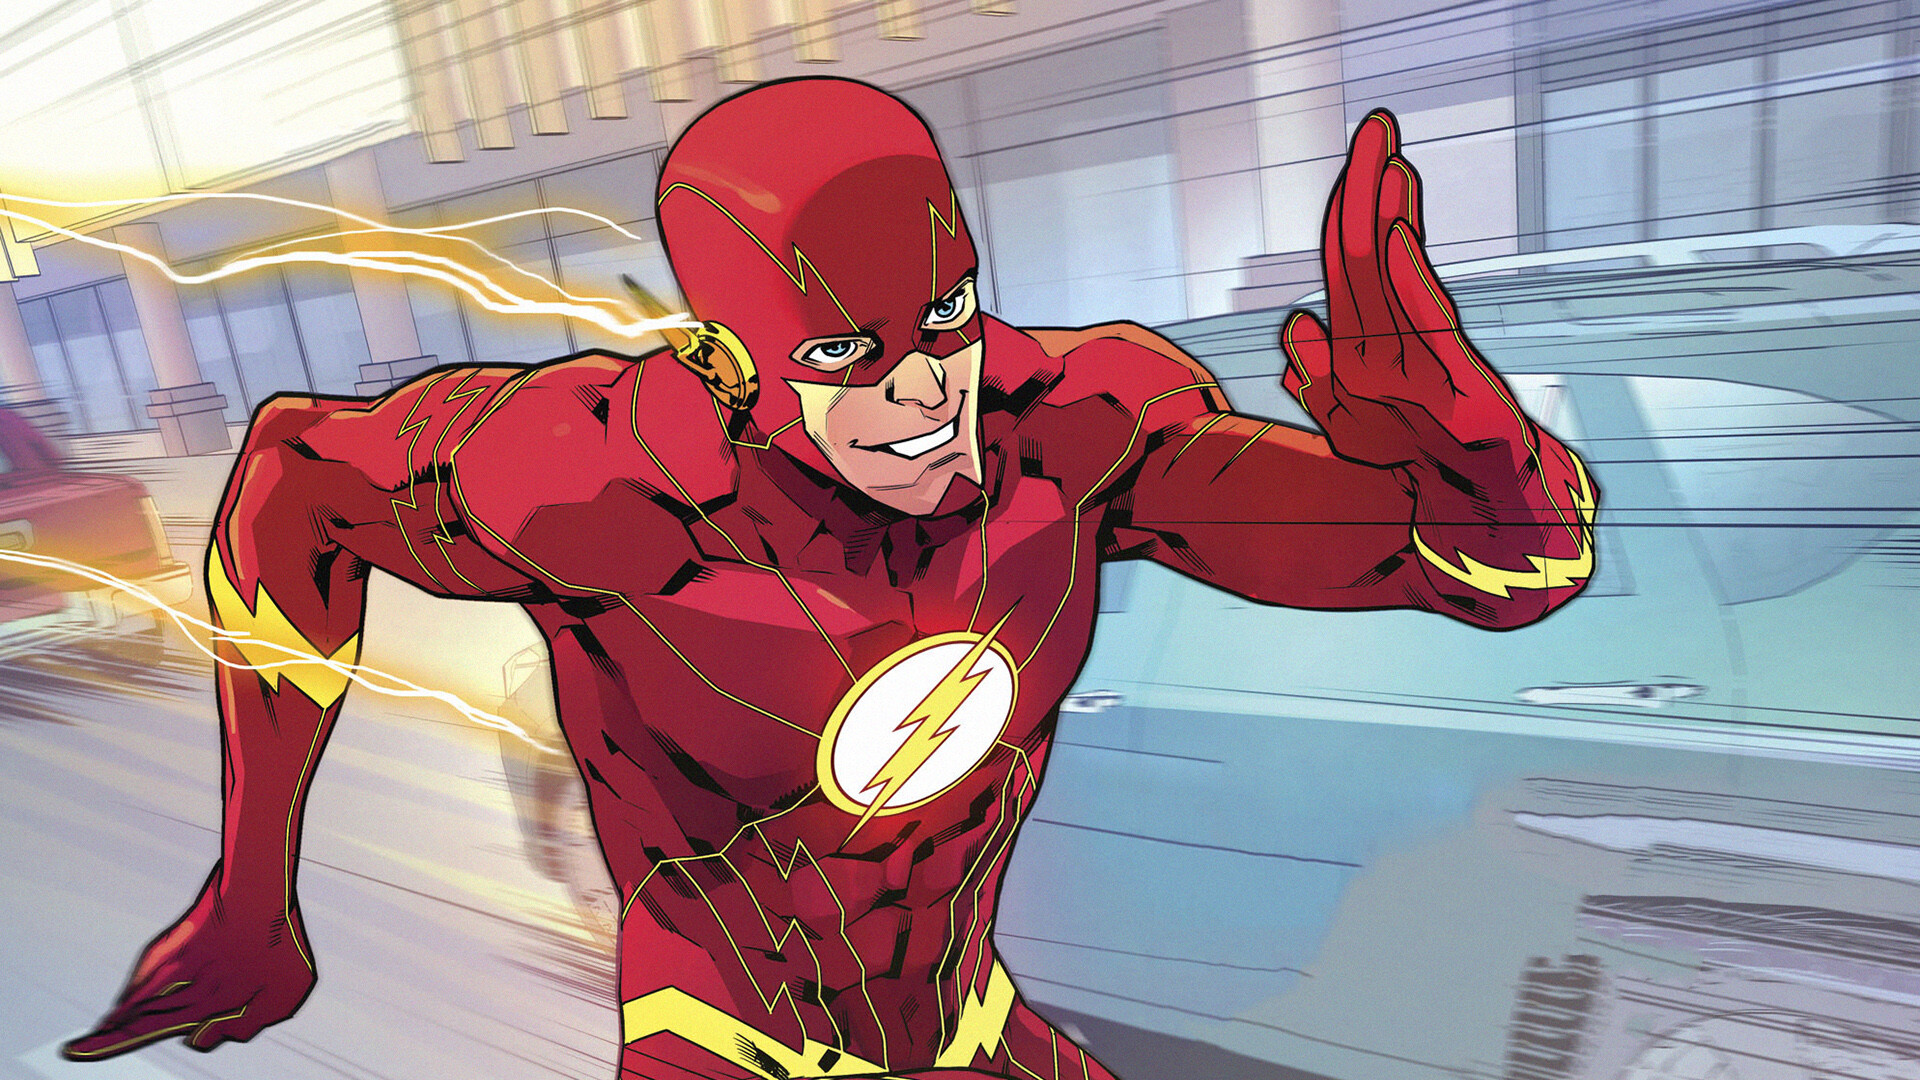 Flash (DC): Barry Allen, A police scientist, Got his powers when a lightning bolt hit his lab. 1920x1080 Full HD Background.